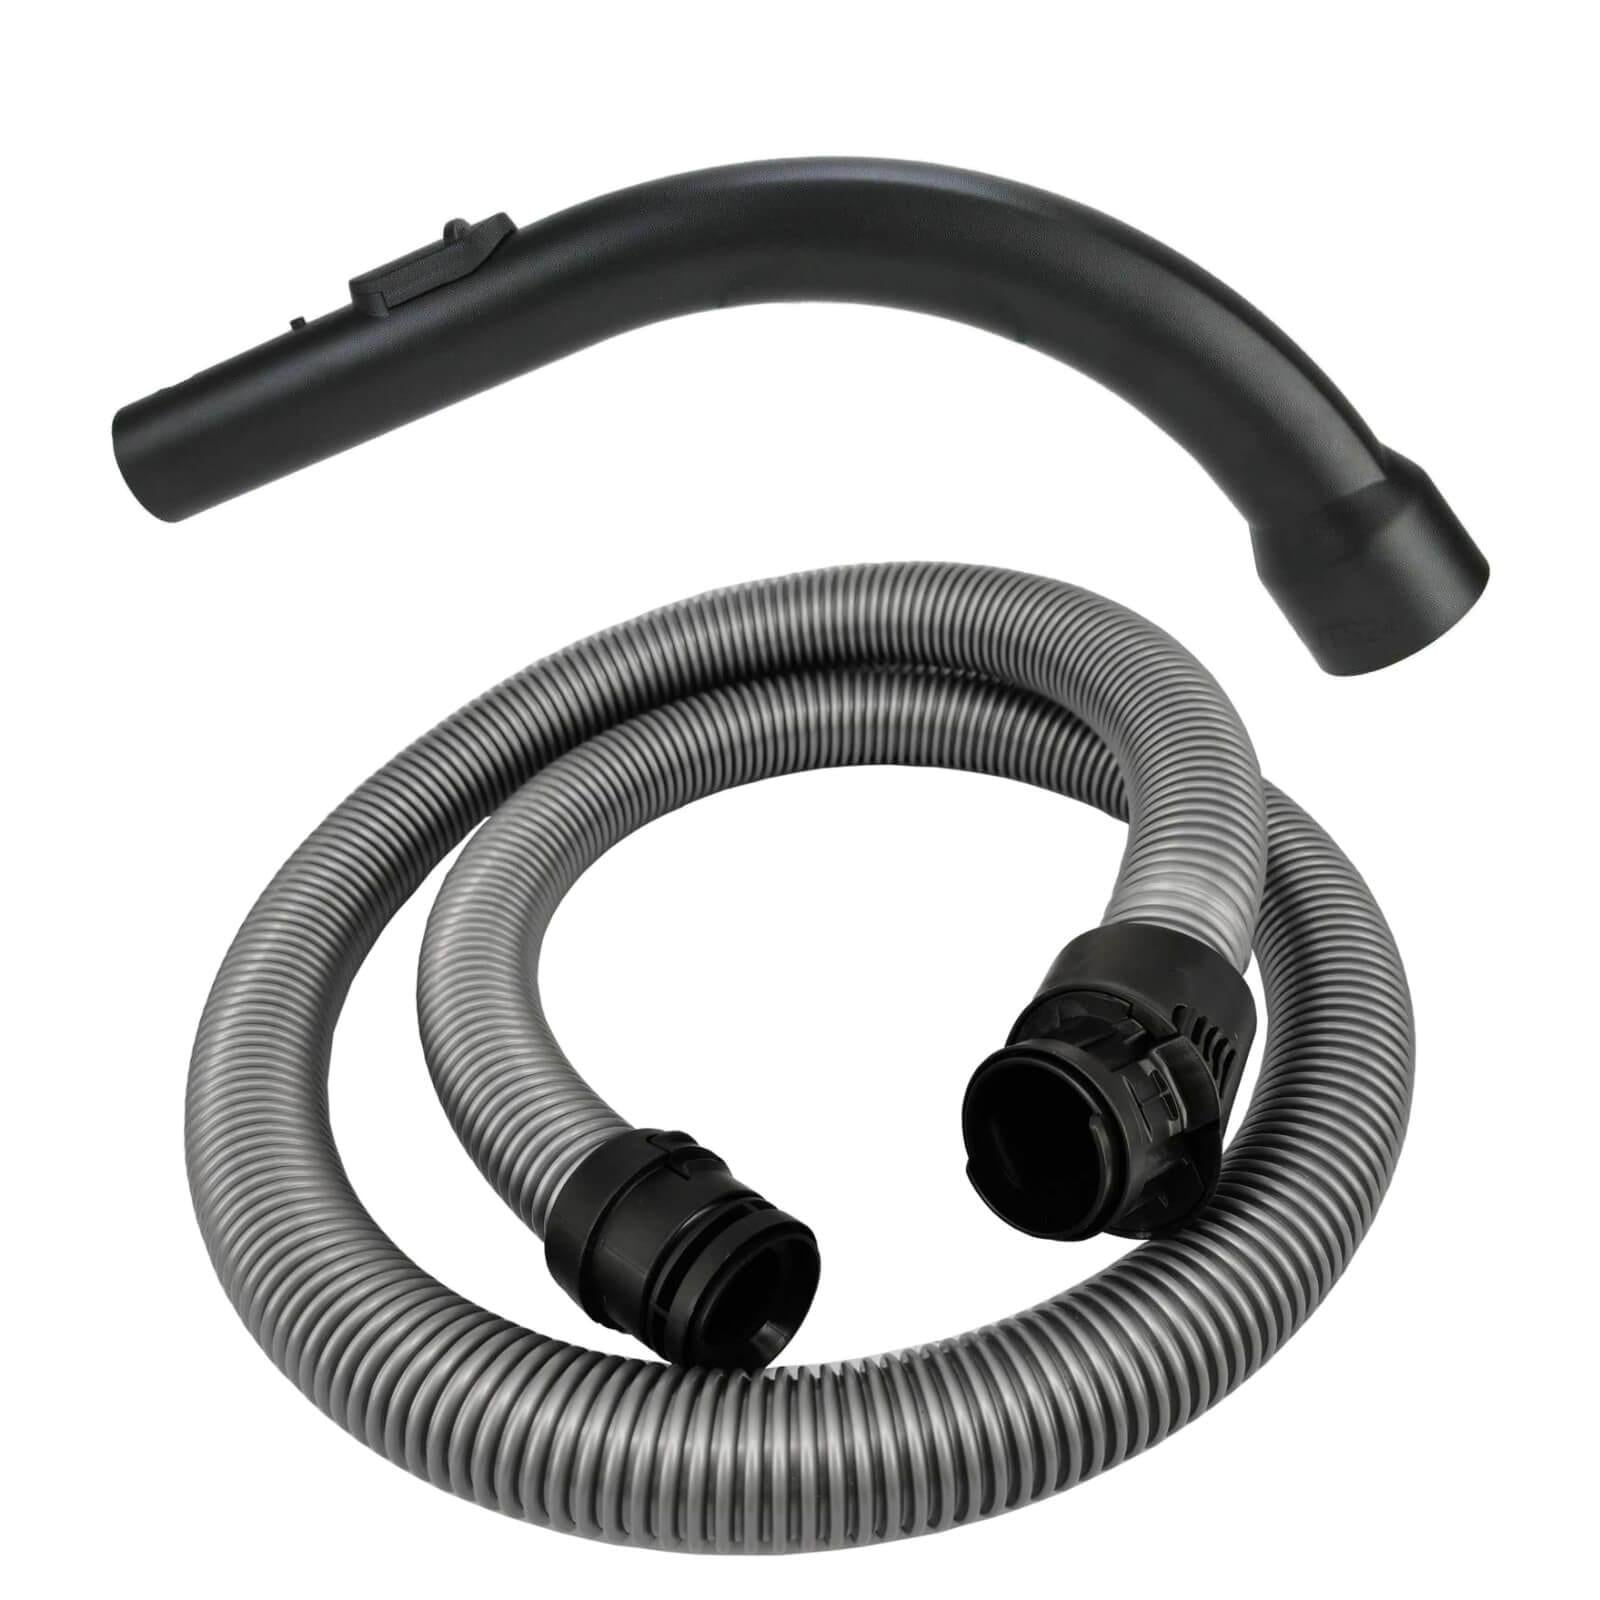 Vacuum Hose & Handle for Miele Complete C3 S6000 S6 S8 SGFE0 Serie Sparesbarn